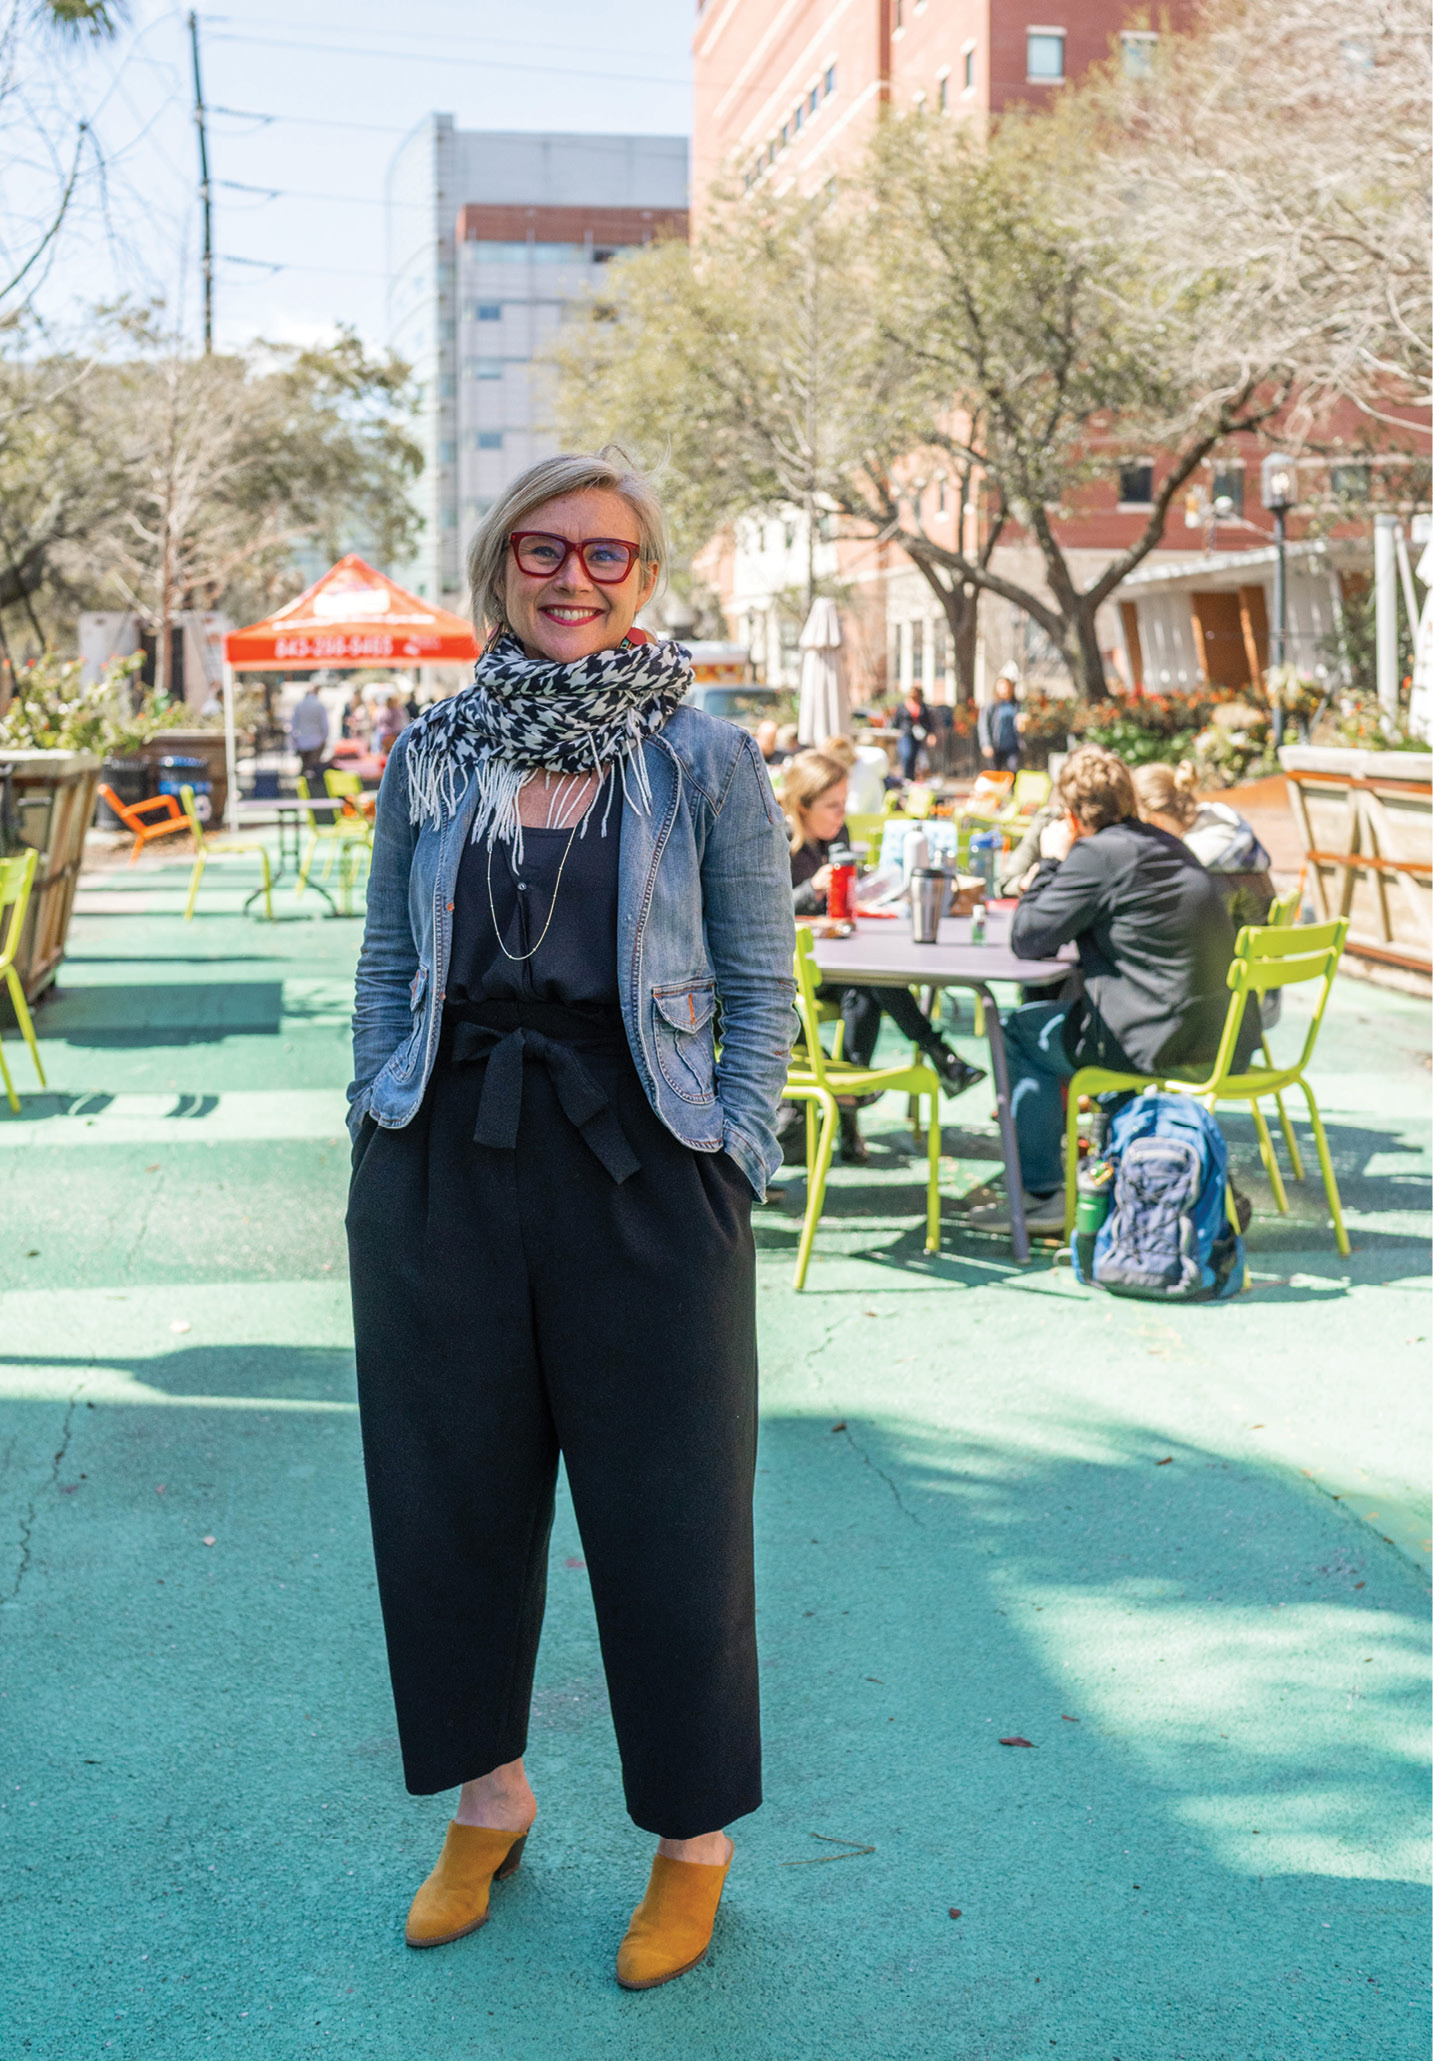 “Livability is shaped by what happens in the public realm,” says the director of the Urban Land Institute’s South Carolina chapter, Amy Barrett, shown here at the pedestrian mall on MUSC’s campus, public space reclaimed from a street closed to car traffic.